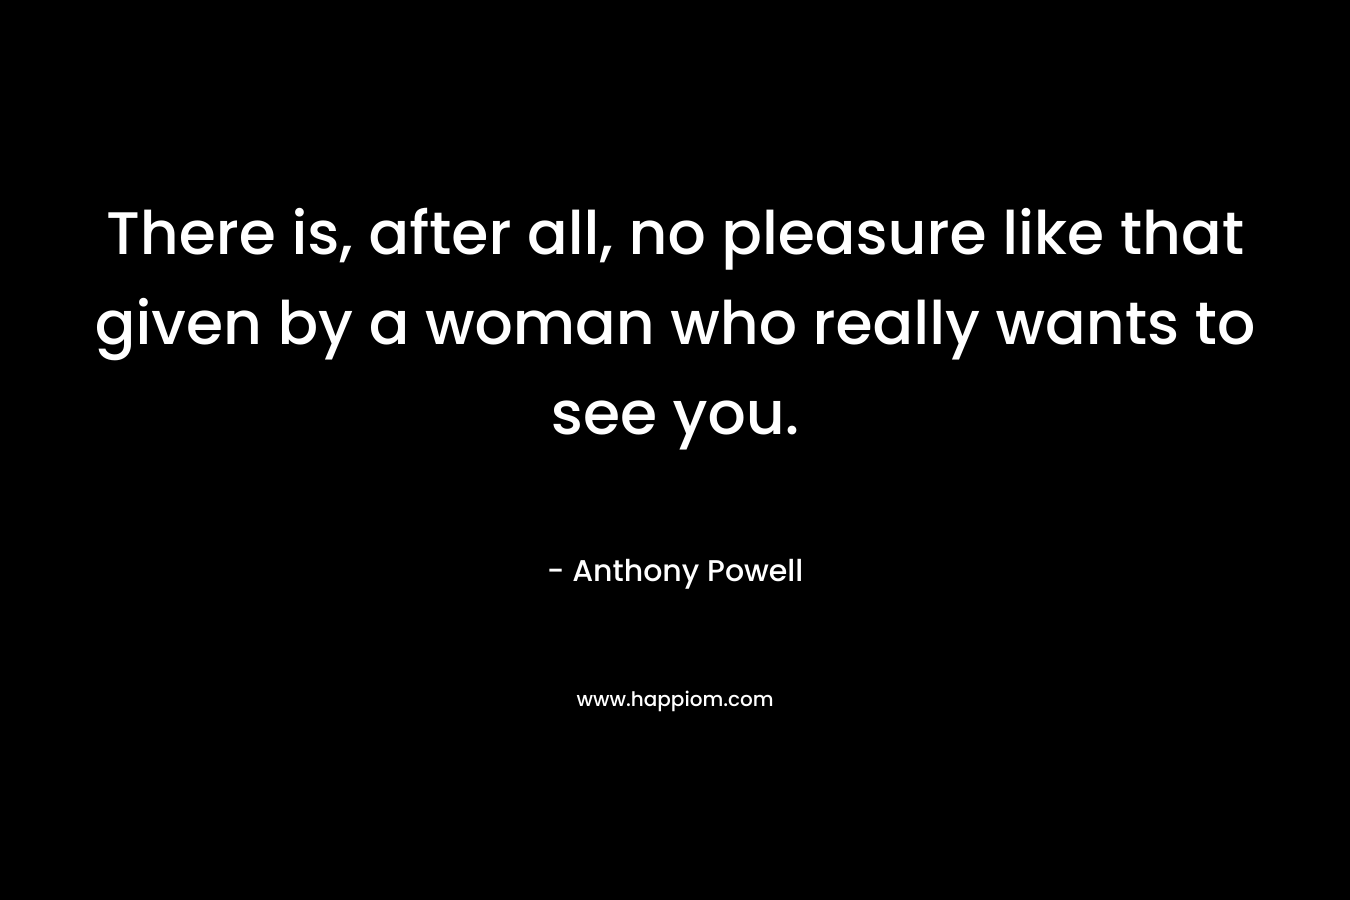 There is, after all, no pleasure like that given by a woman who really wants to see you.